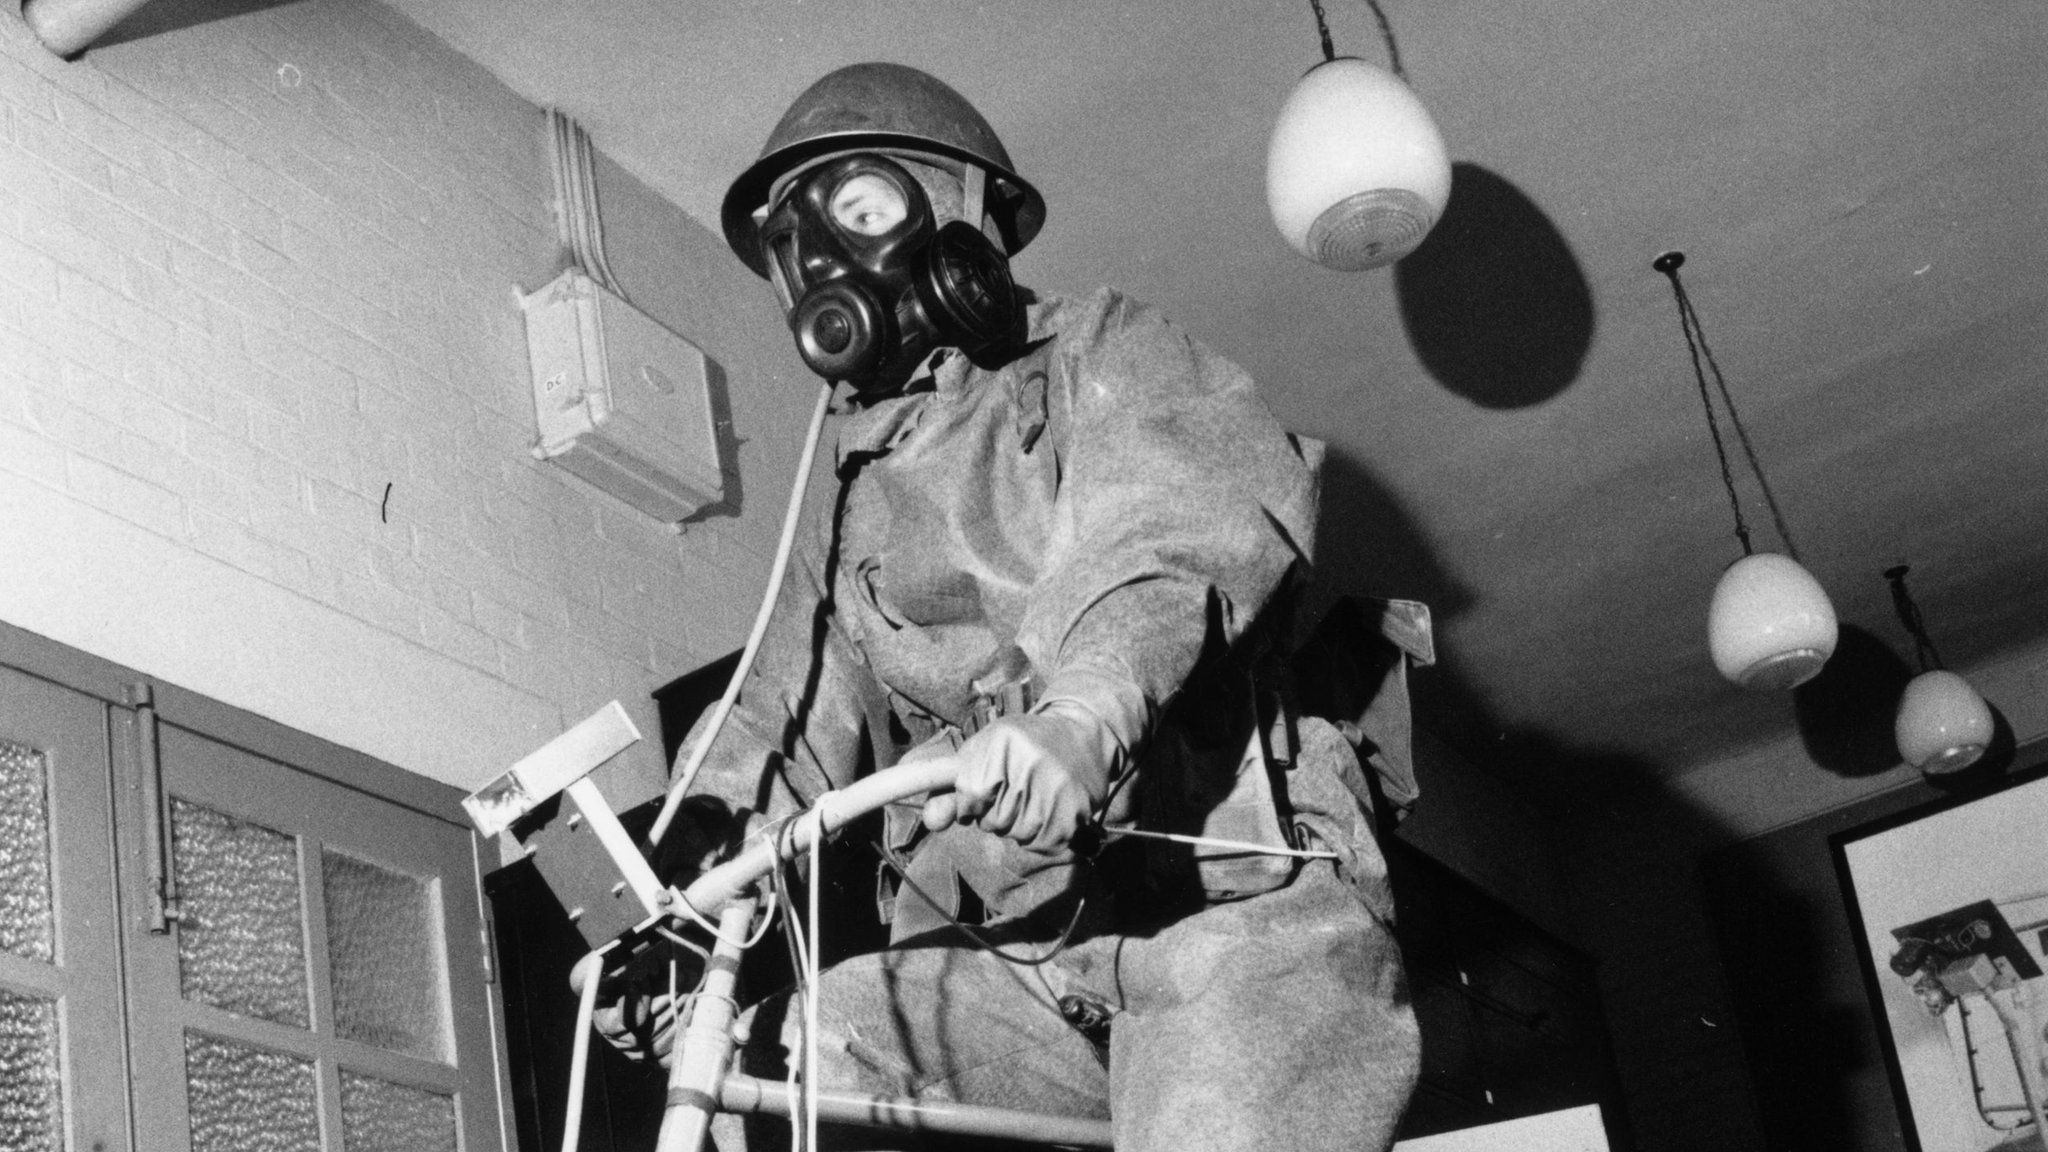 23rd May 1964: A soldier testing a respiratory mask and protective suit by pedaling on a fixed bicycle at the chemical defence establishment at Porton Down, Wiltshire